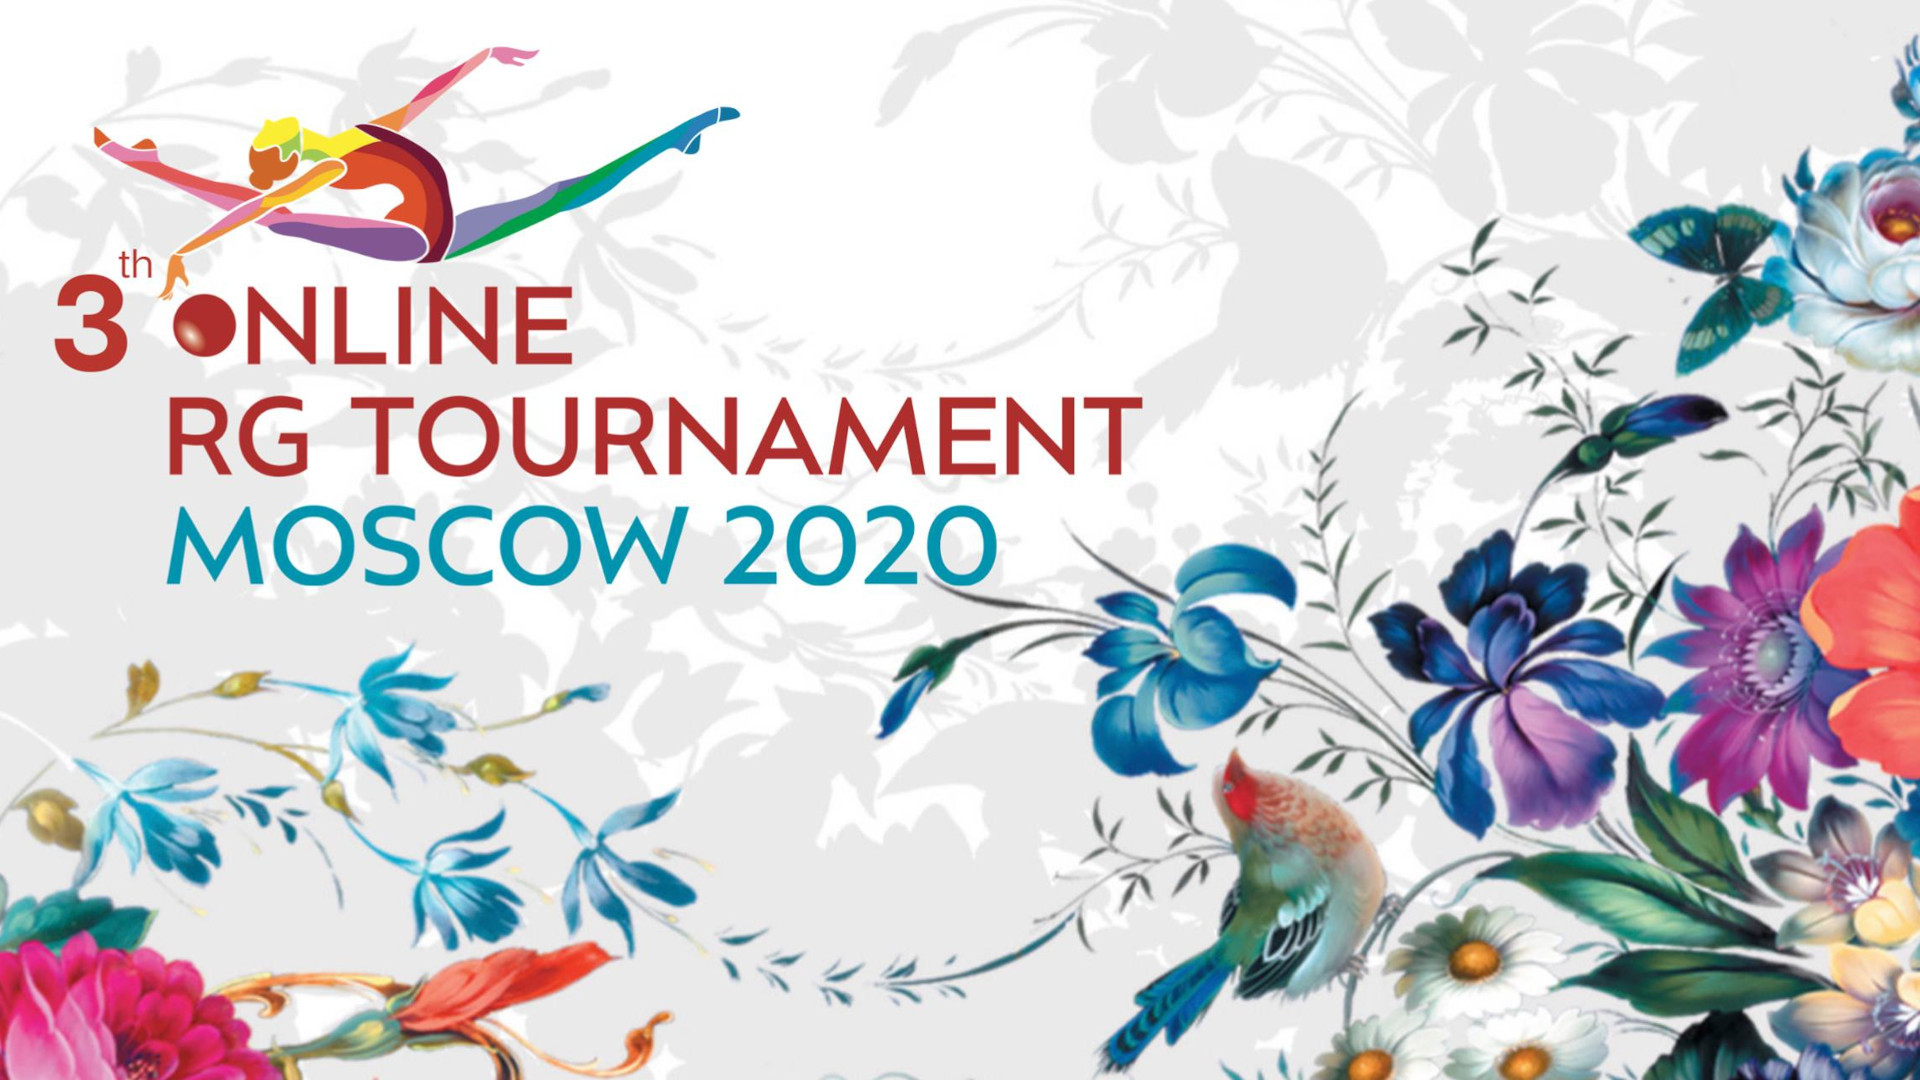 3rd Online RG Tournament Moscow 2020 Live